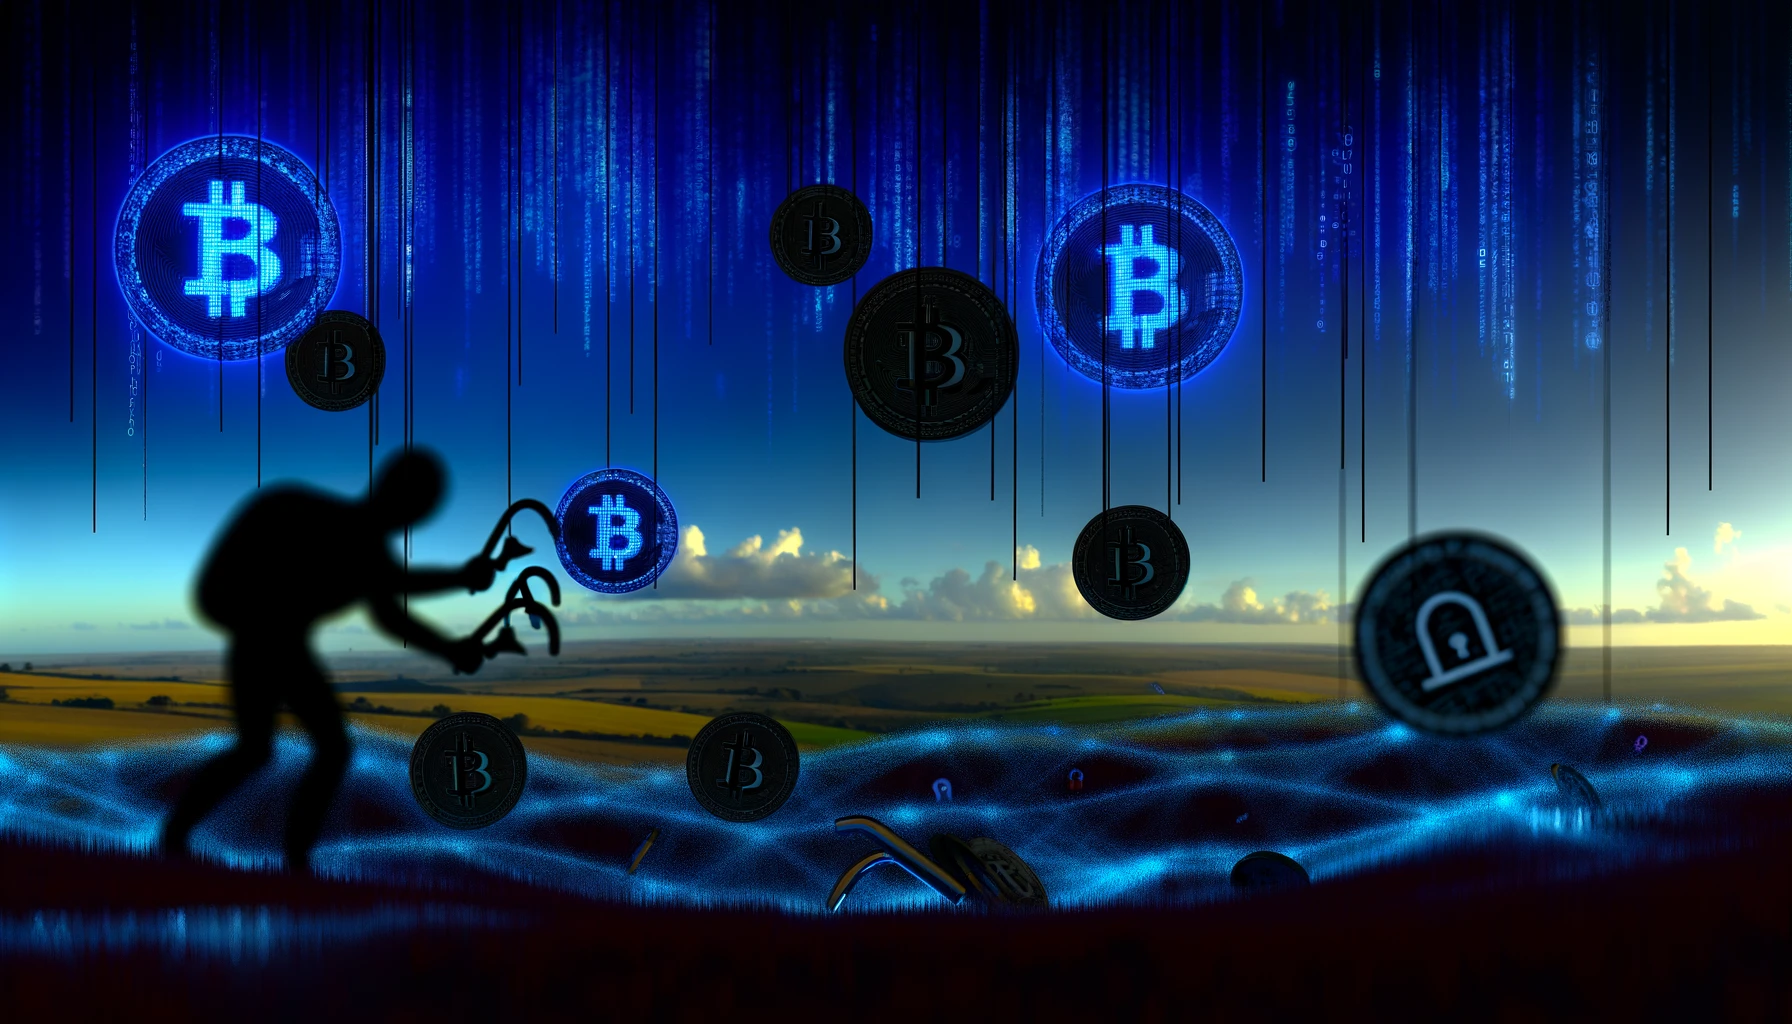 Two digital images by DALL·E depicting abstract crypto fraud concepts in a dark, code-filled landscape.